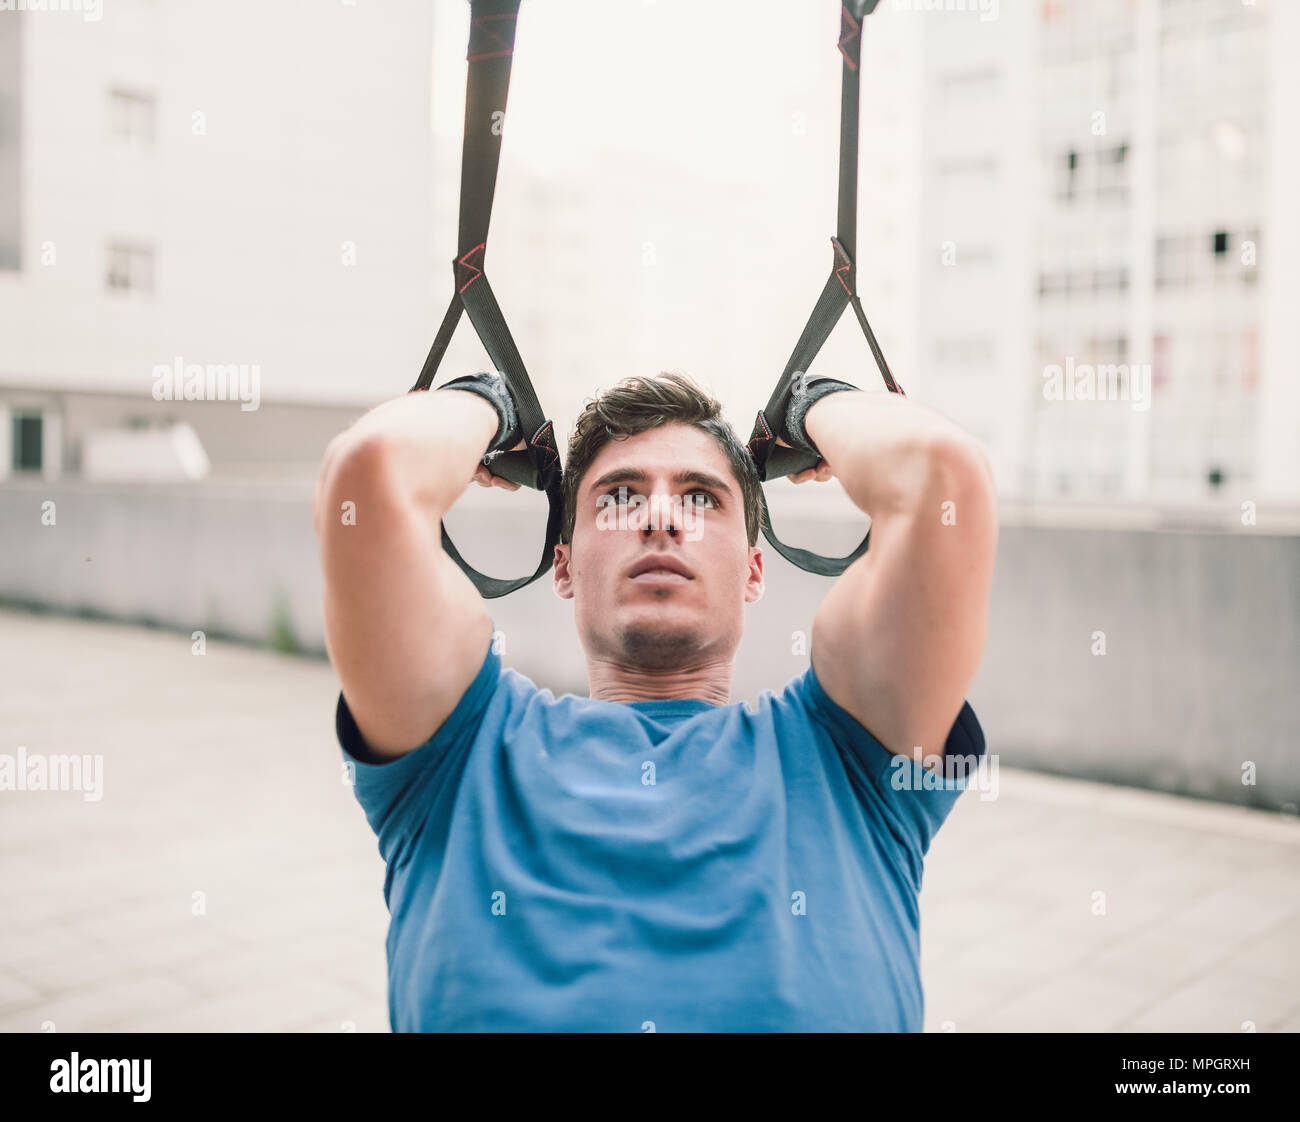 Sporty male exercising with fitness trx straps in the street Stock Photo